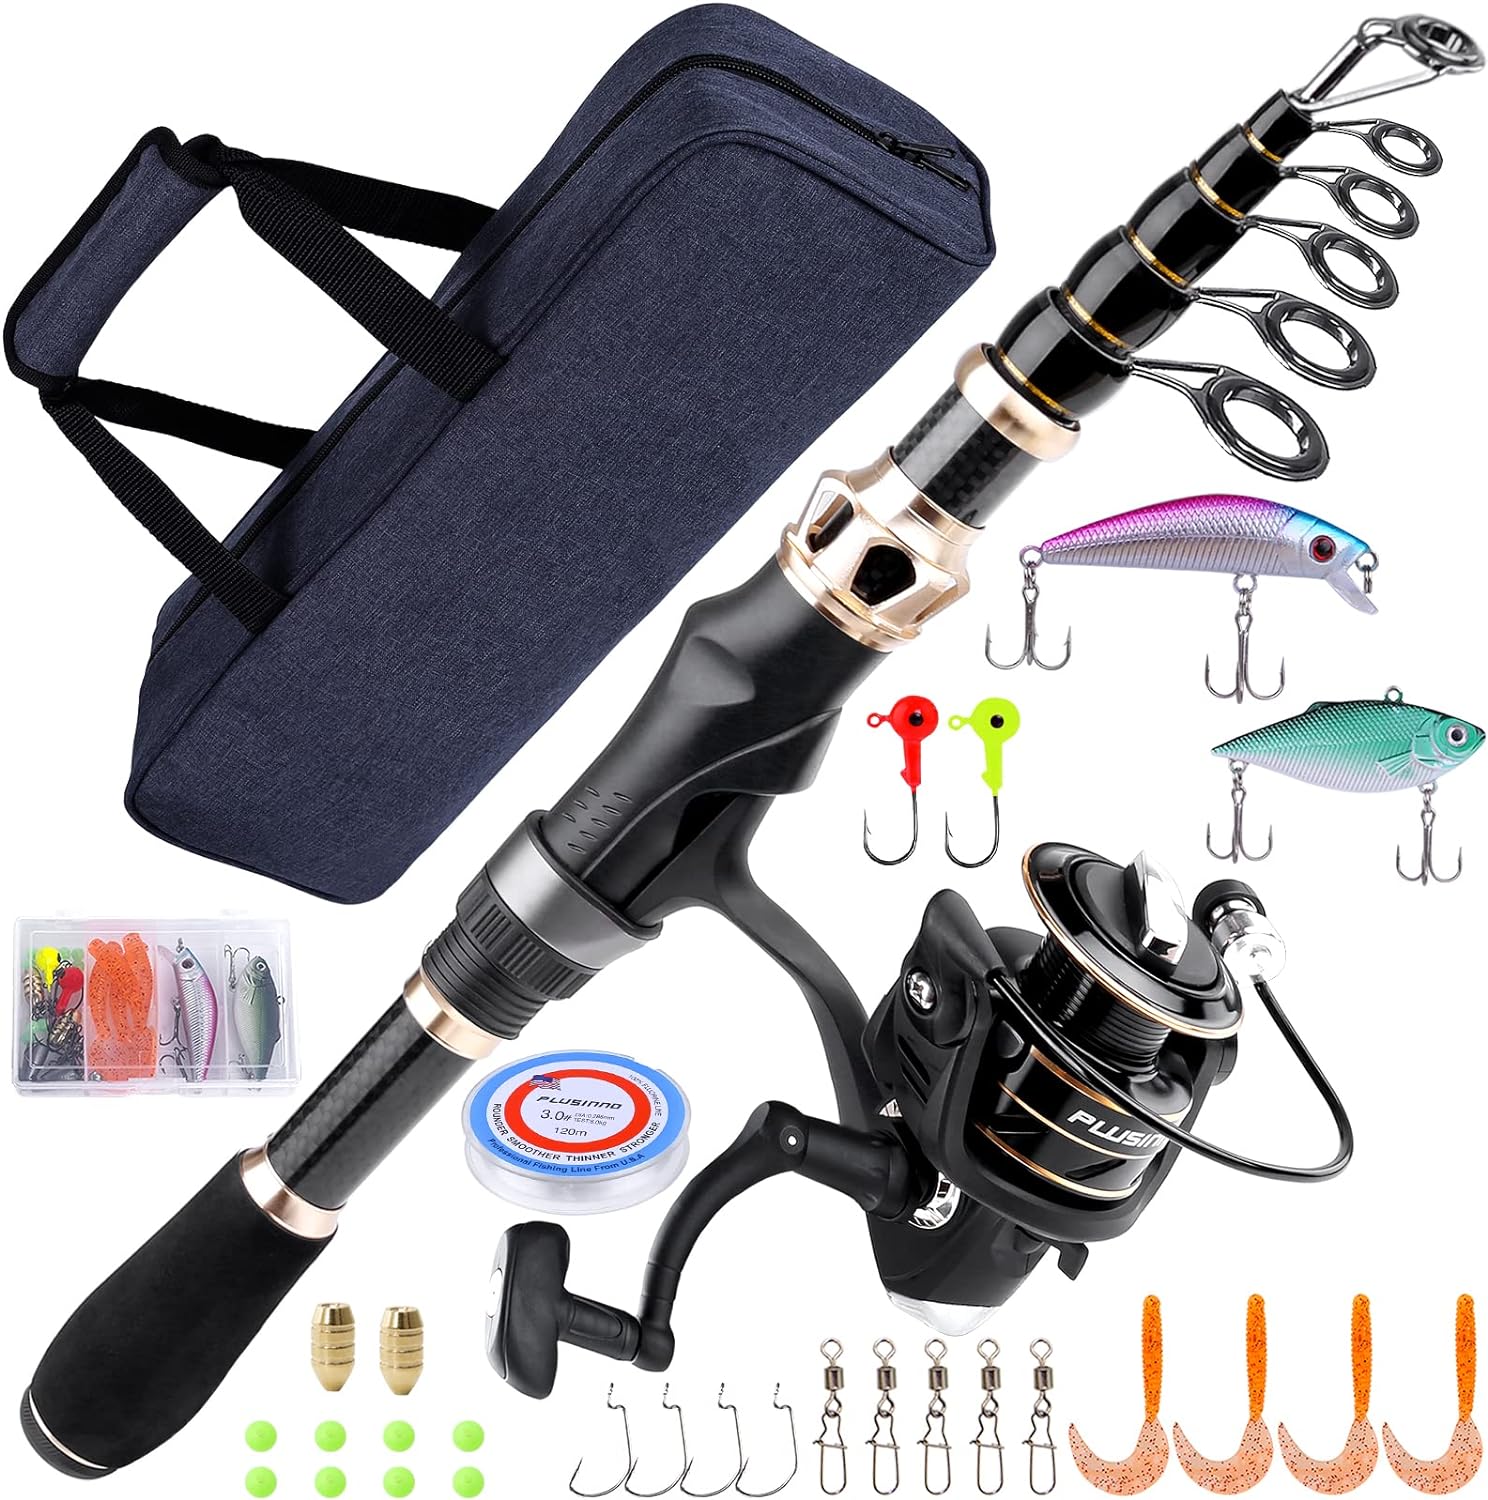 PLUSINNO Fishing Rod and Reel Combos Carbon Fiber Telescopic Fishing Pole with Spinning Reels Sea Saltwater Freshwater Kit Fishing Rod Kit